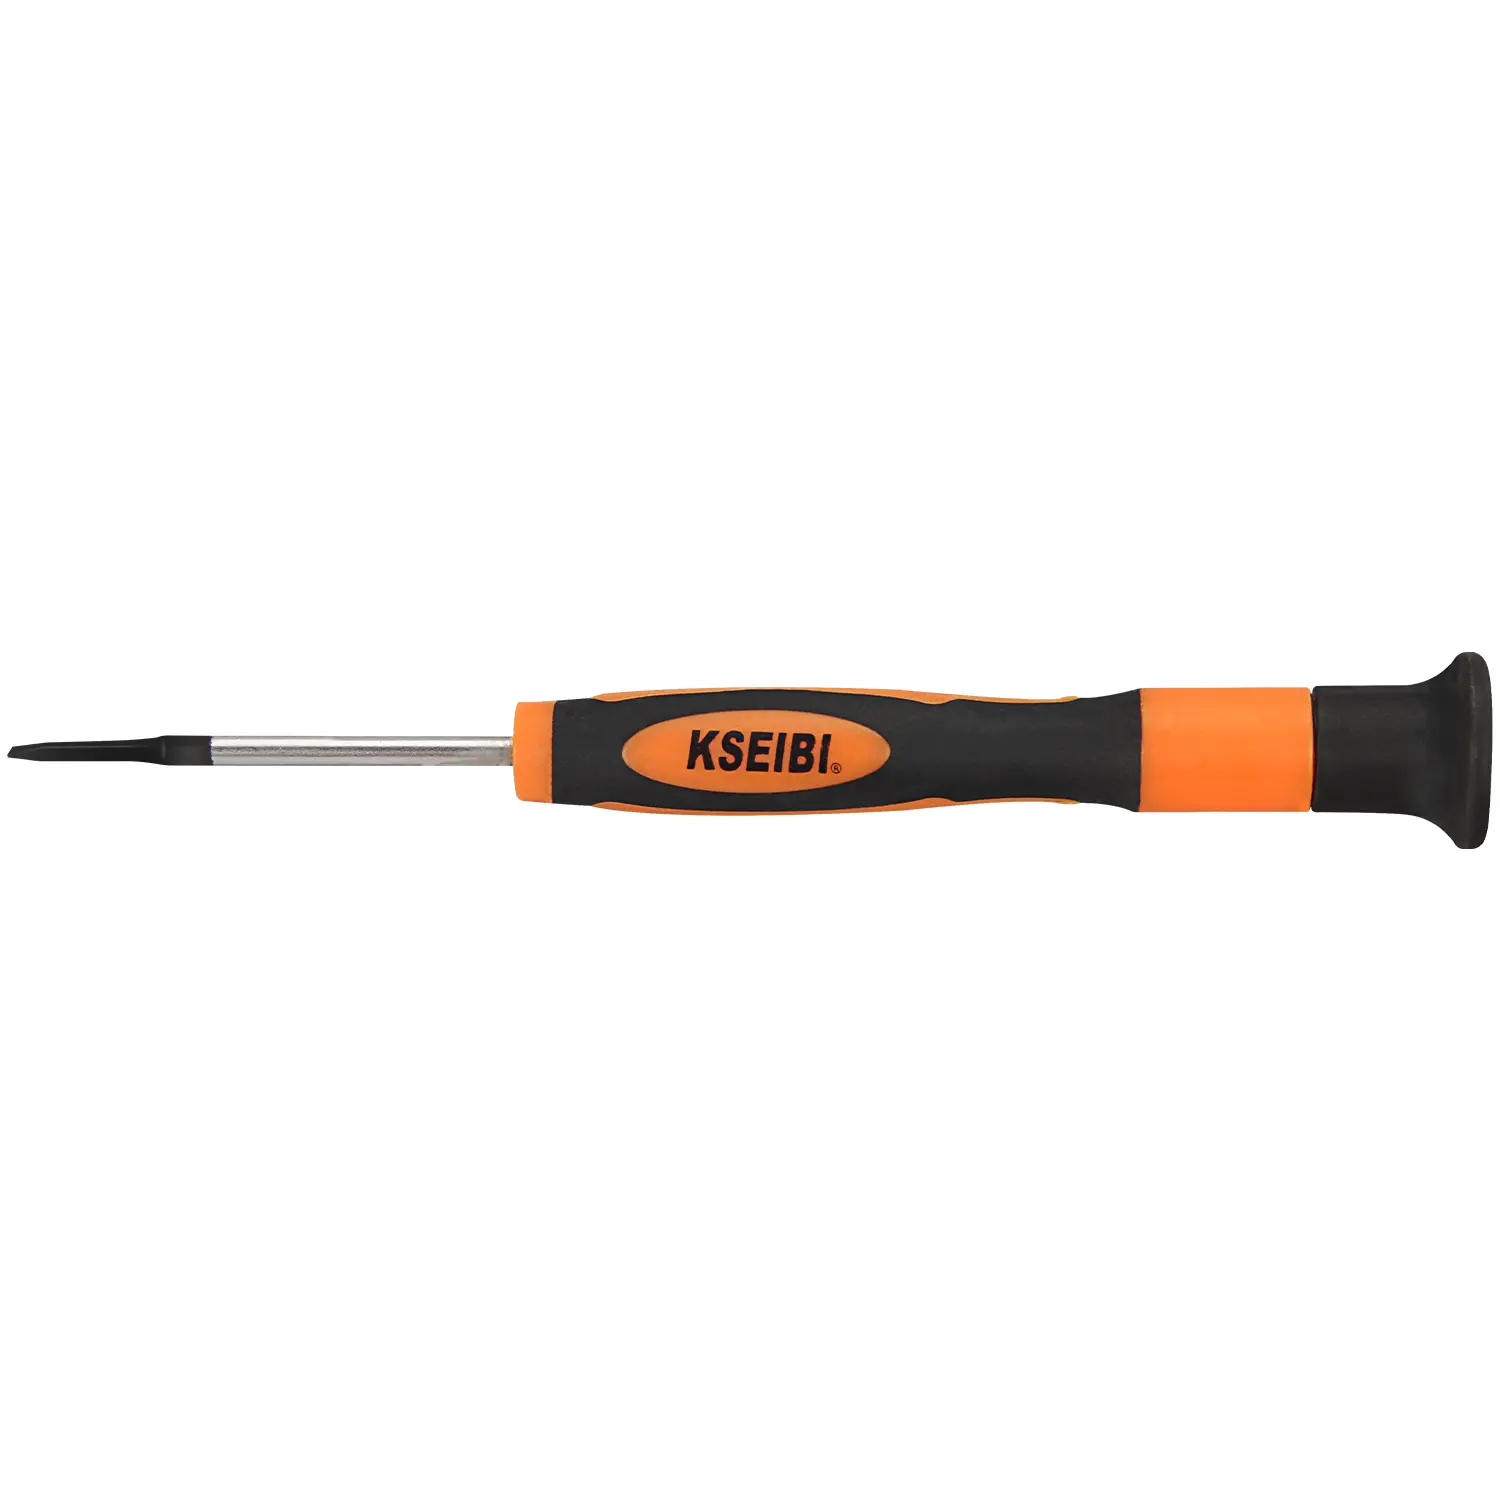 KSEIBI Best Selling Slotted Precision Screwdriver With Black Finish Magnetic Tip 1.5x50MM, 2.0x50MM, 2.5x50MM